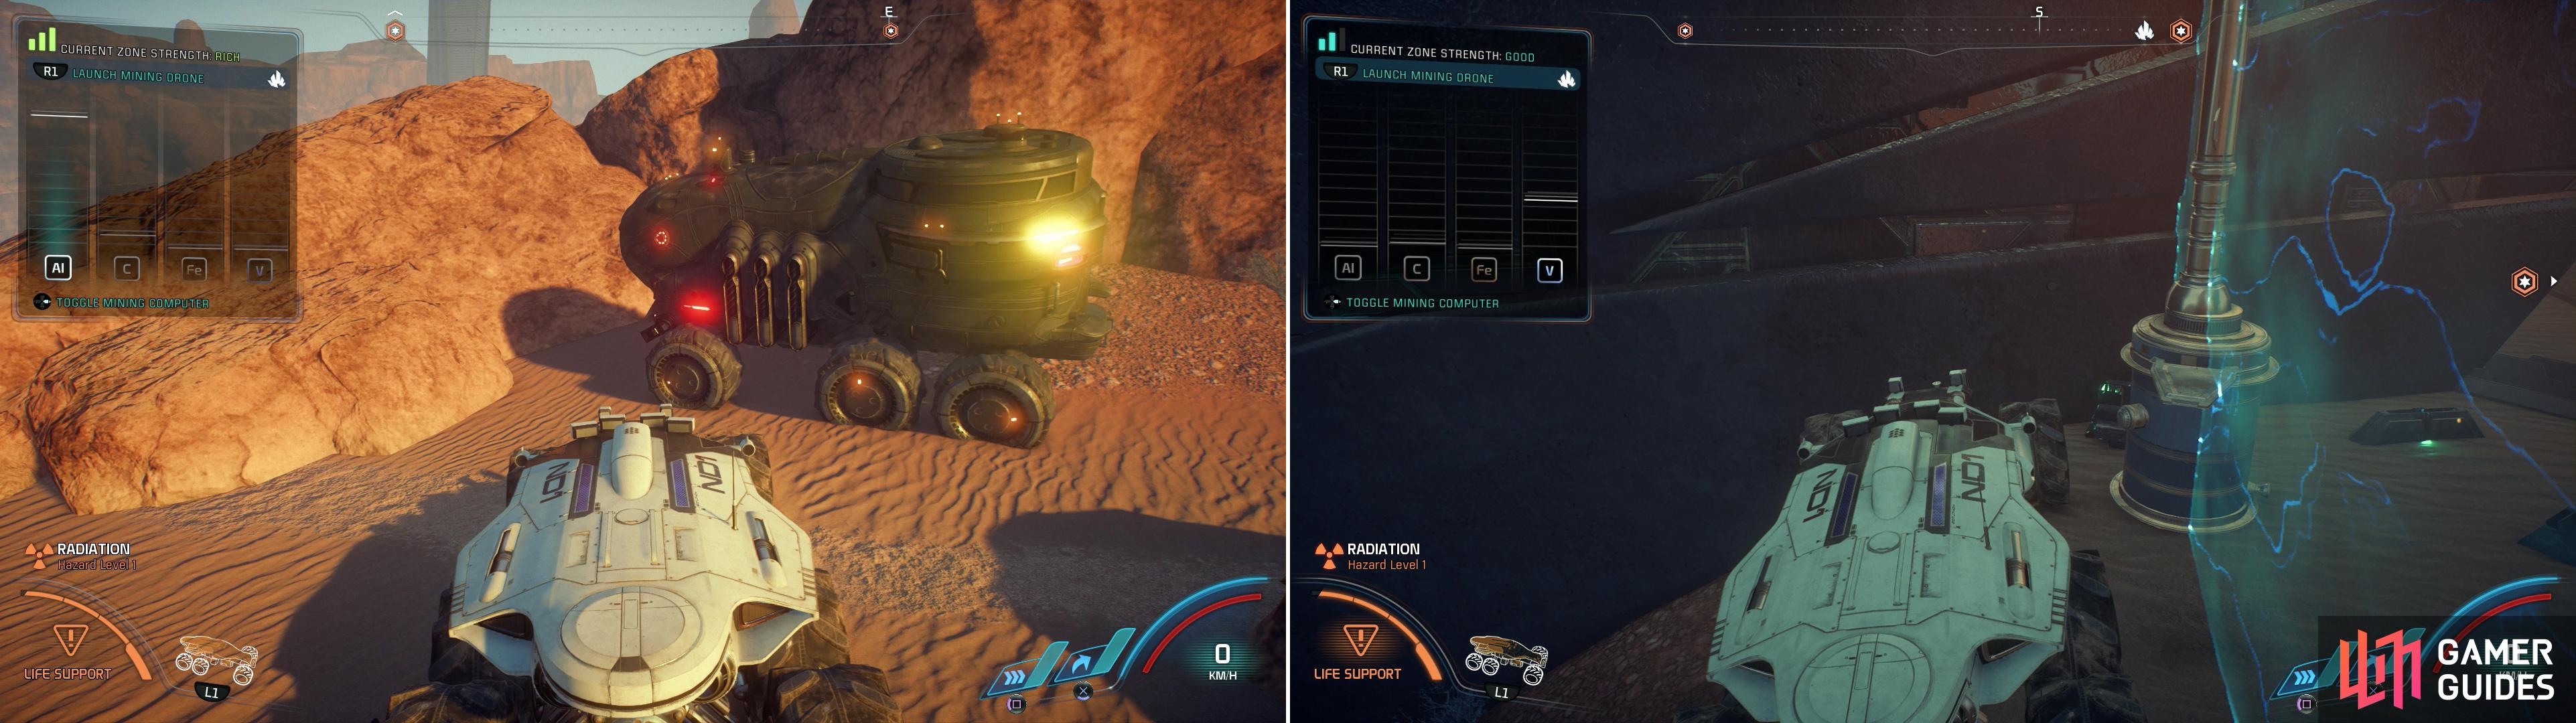 Near the second monolith youll find a Mining Zone, which you can exploit for minerals (left). Be aware that while high amounts of common minerals might be easier to find, rare nodes are often more picky (right).